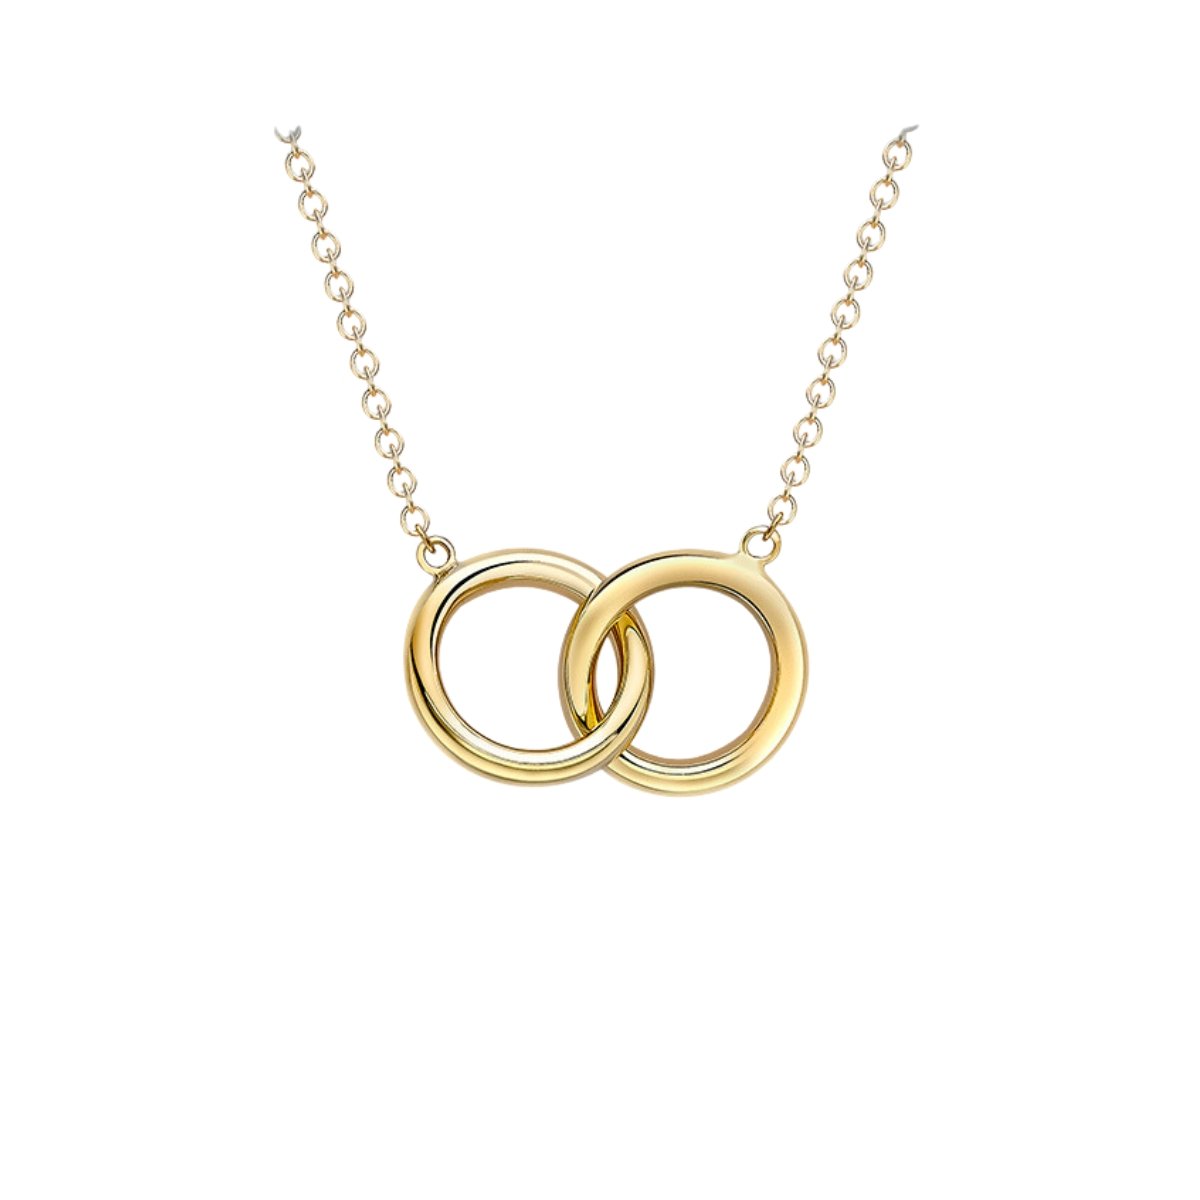 9 Carat Yellow Gold 11.8mm 'Linked Rings' Adjustable Necklace - A Symbol of Unity and Versatile Style | Interconnected Splendor - RubyJade